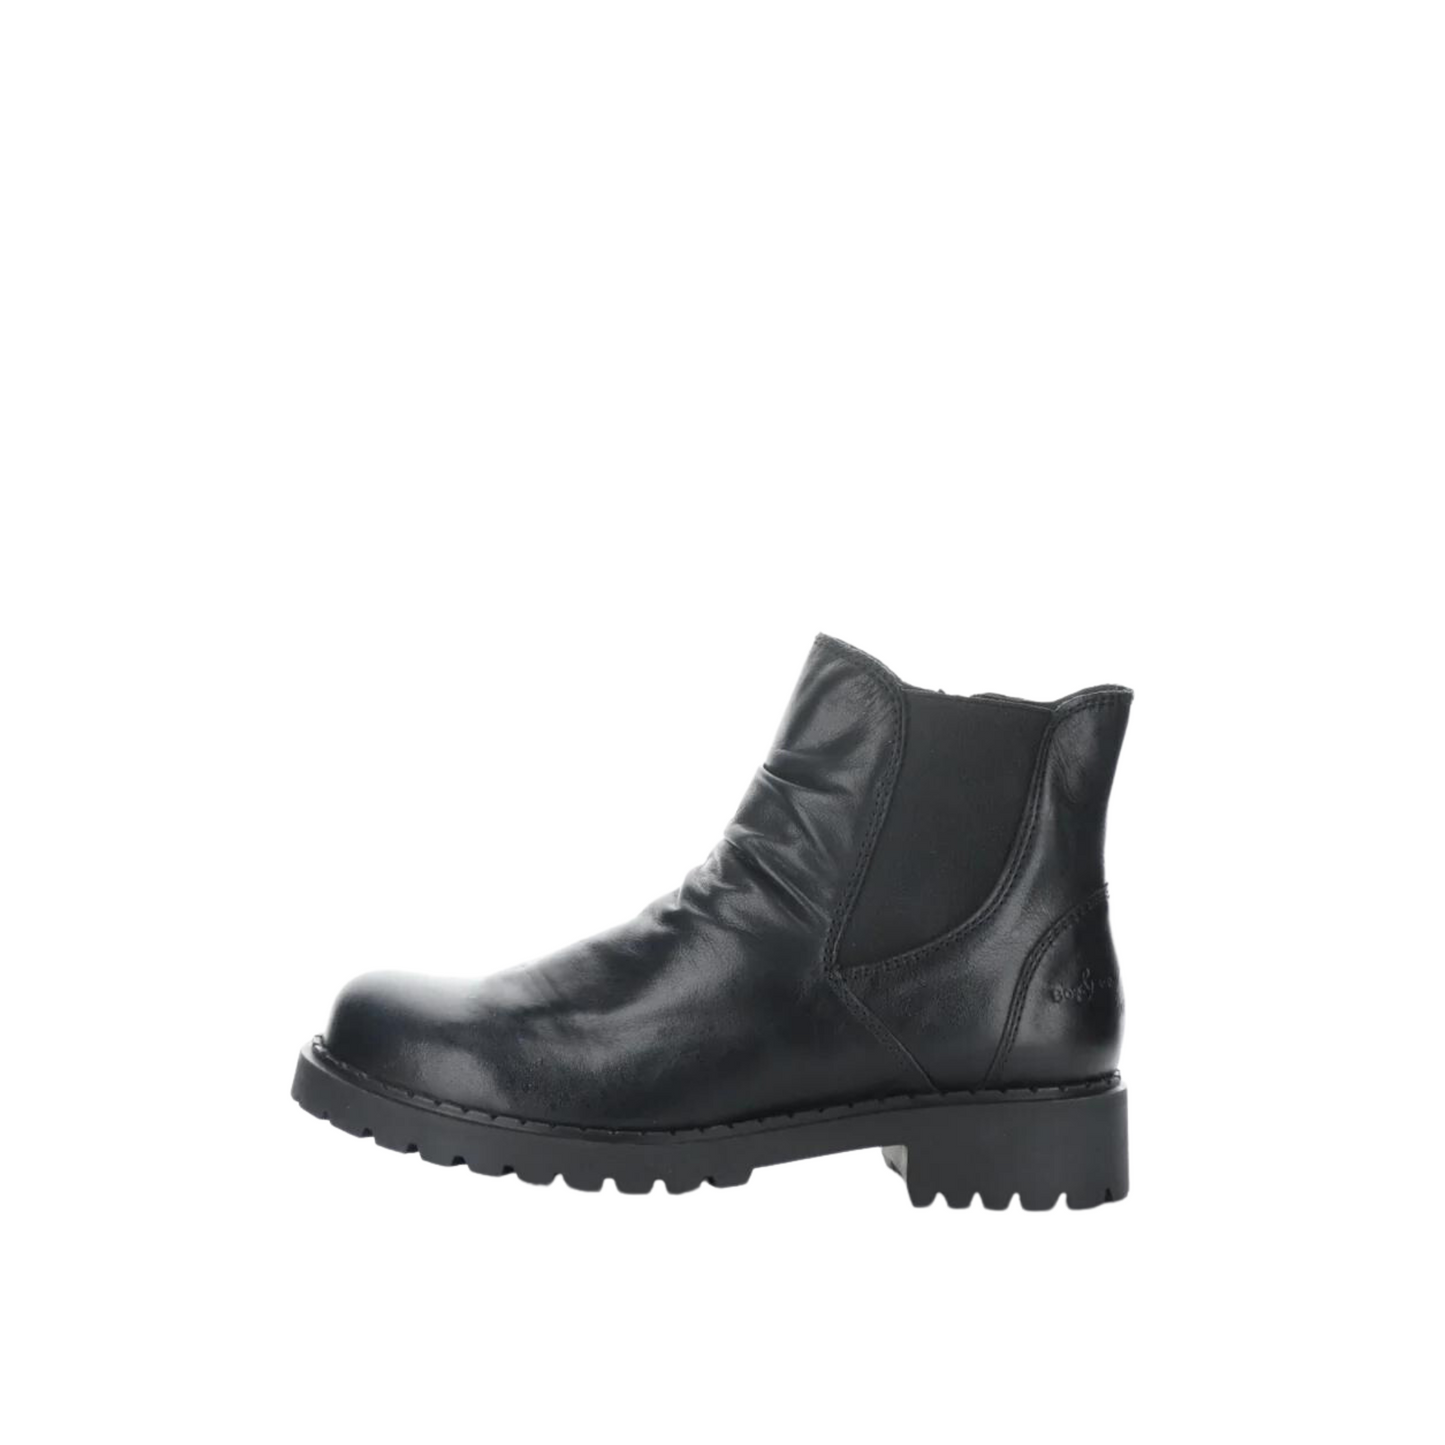 Left side profile of the Bos & Co Barb Boot in the colour Black.